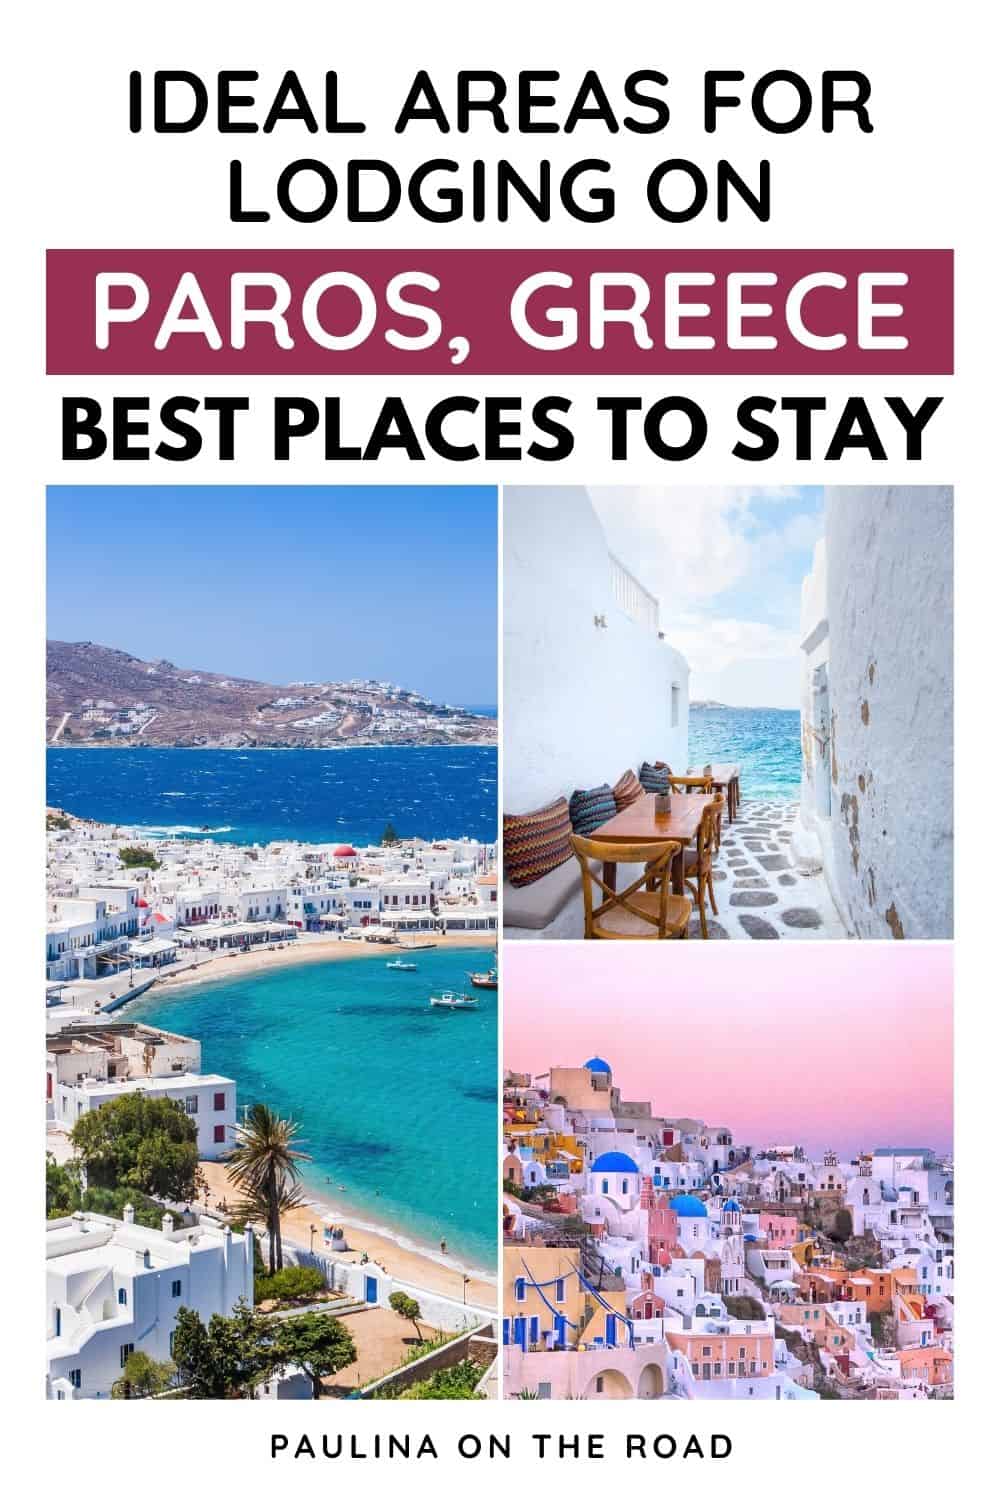 The three photos in a collage show the famous architecture of Greece which is white washed and some blue ceilings. The beach can be seen on the left photo which is beautifully blue and clear.